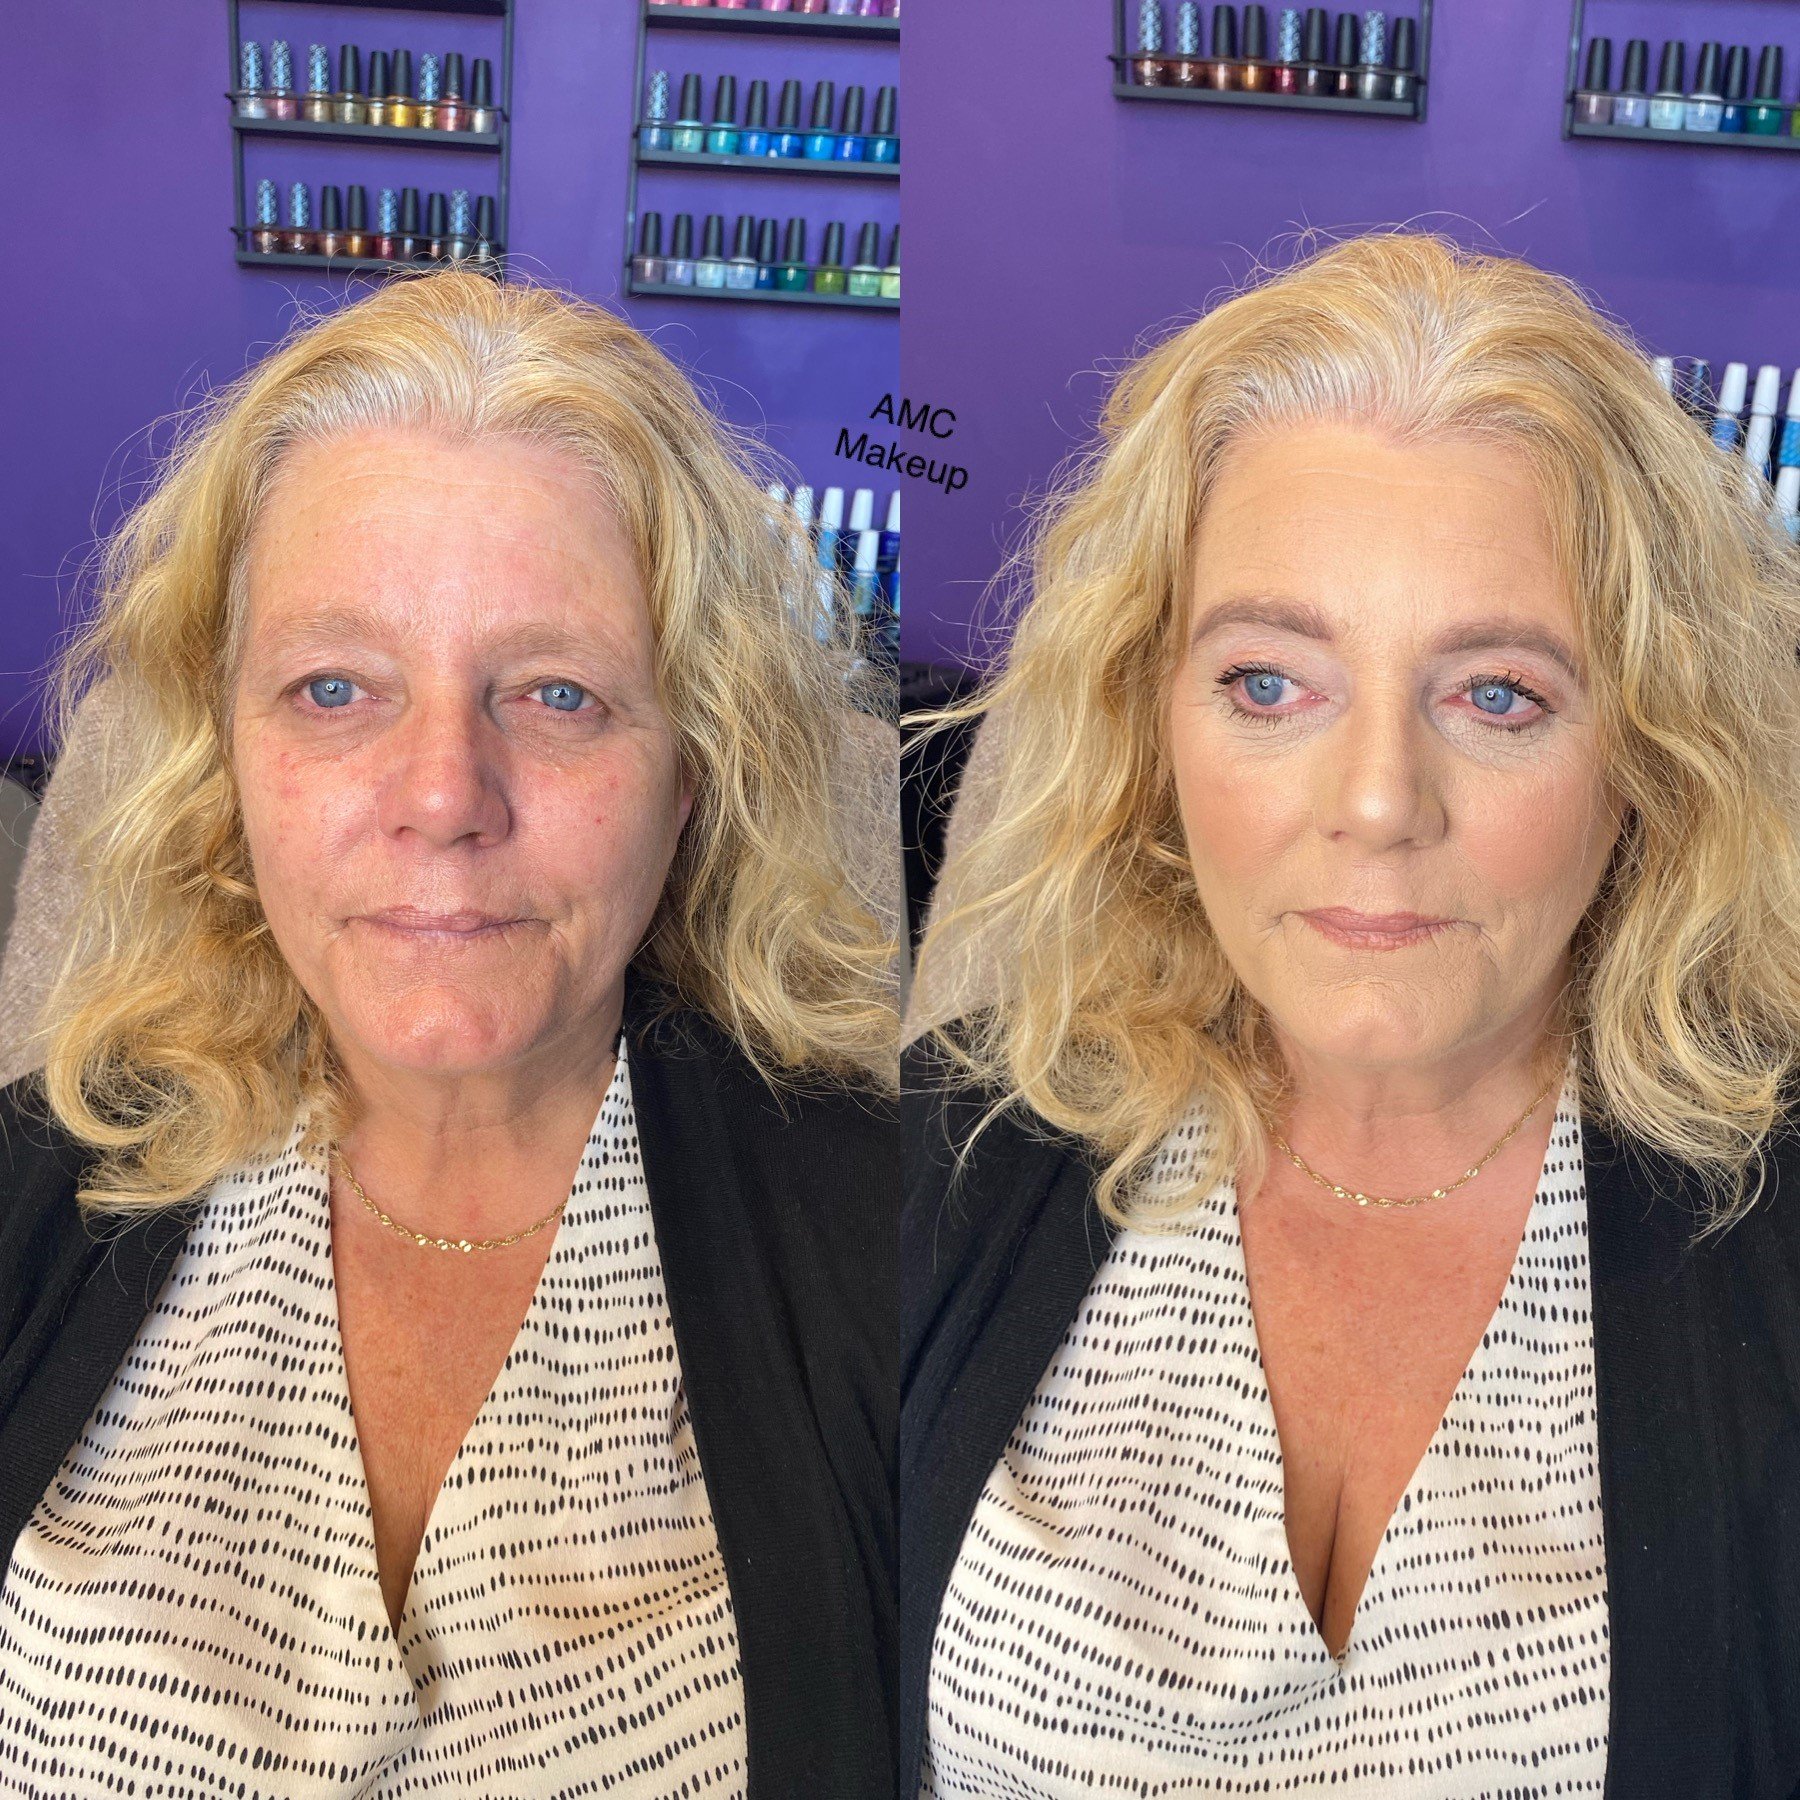 Client Before and after makeup1.jpg